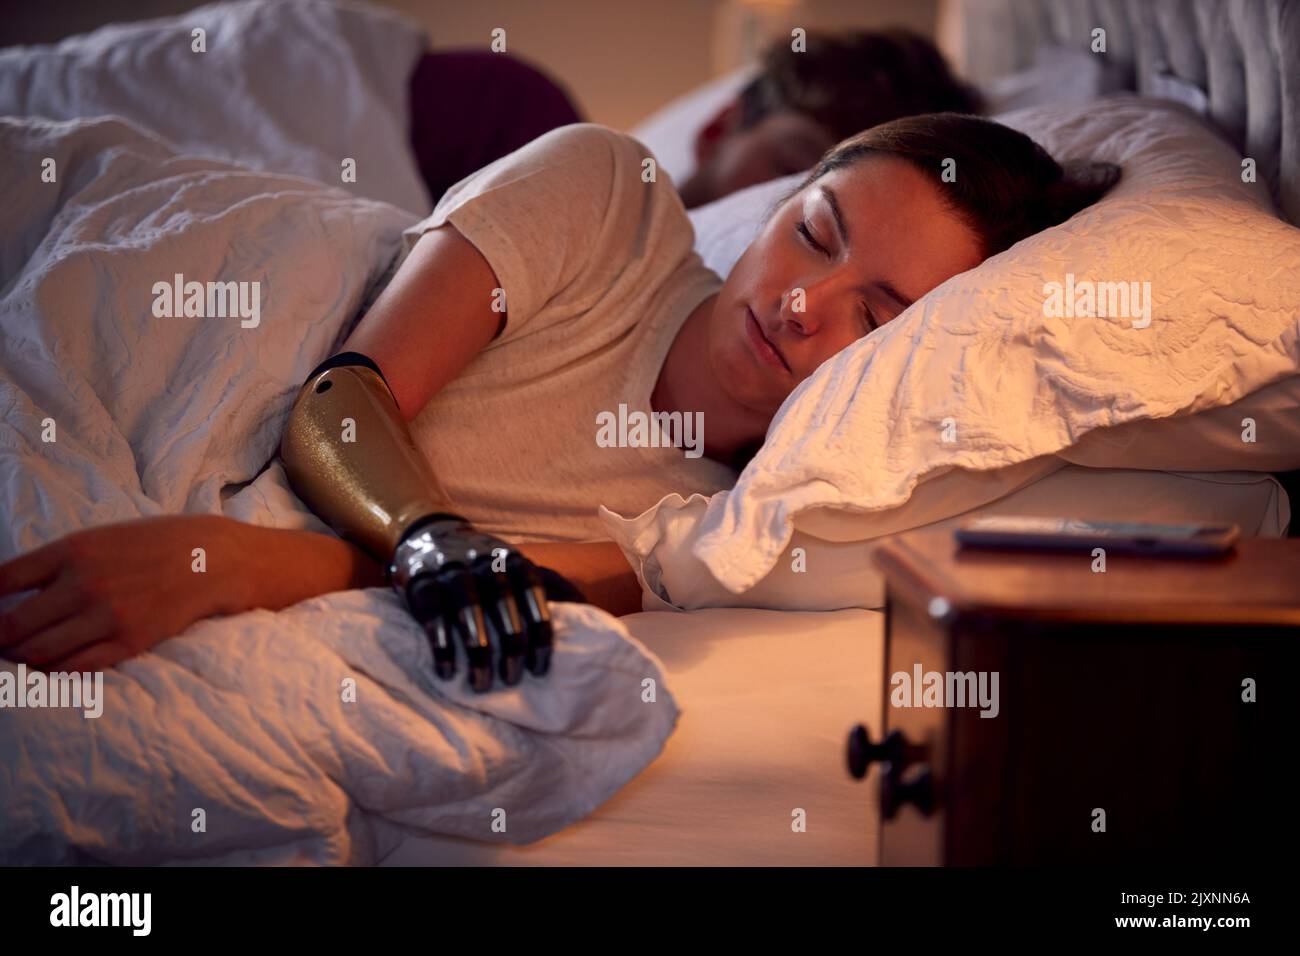 Couple With Woman With Prosthetic Arm Sleeping In Bed At Home Stock Photo